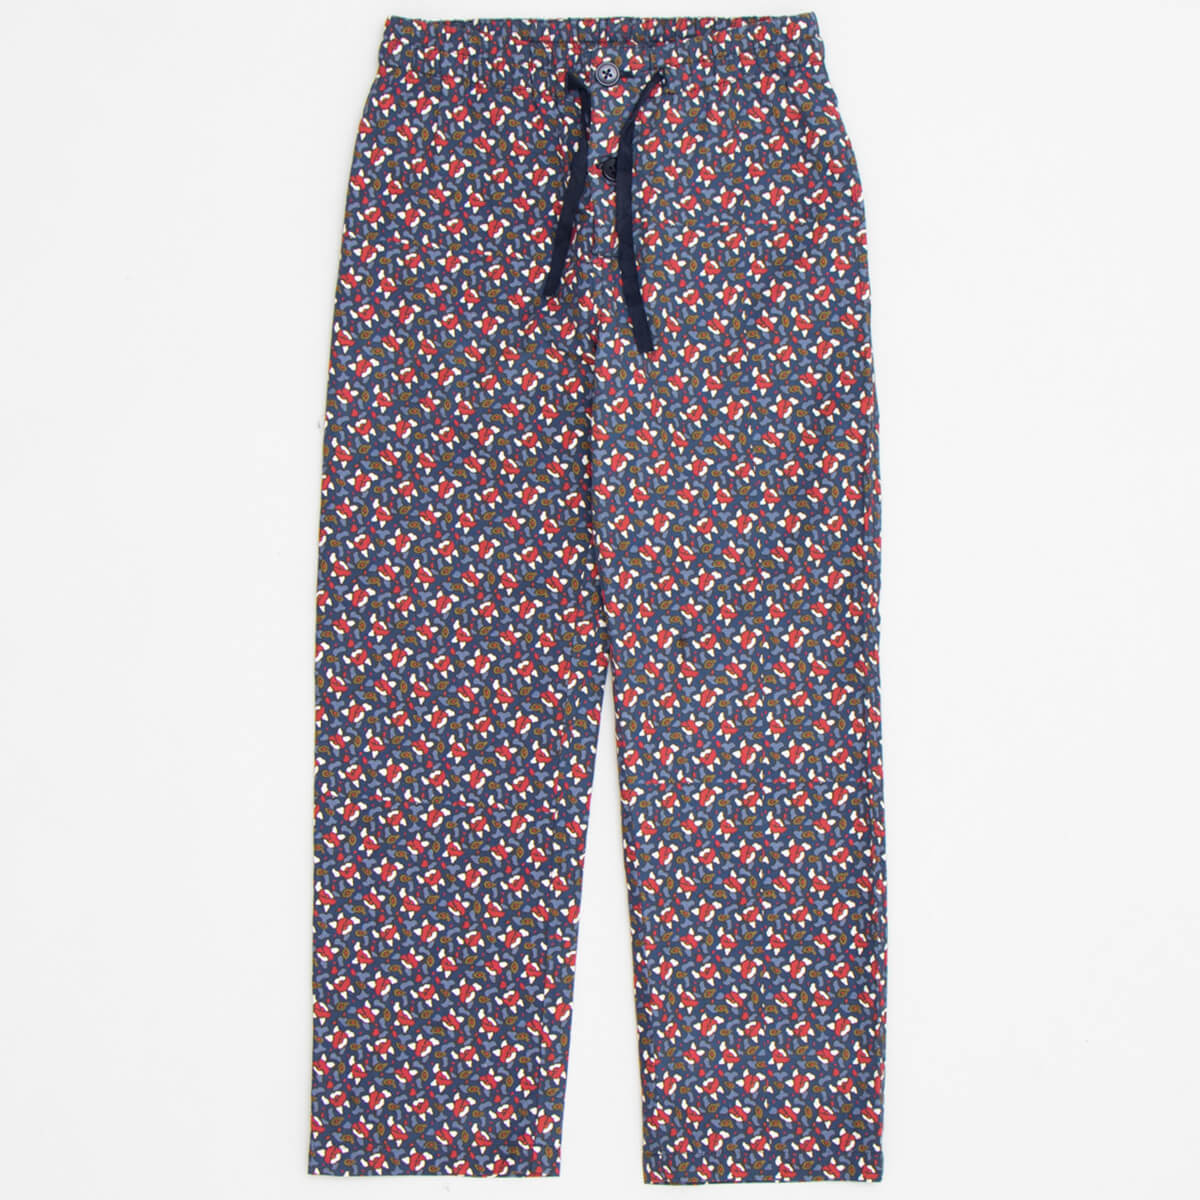 Ficus Trouser in Navy Seed Print by Caramel – Junior Edition